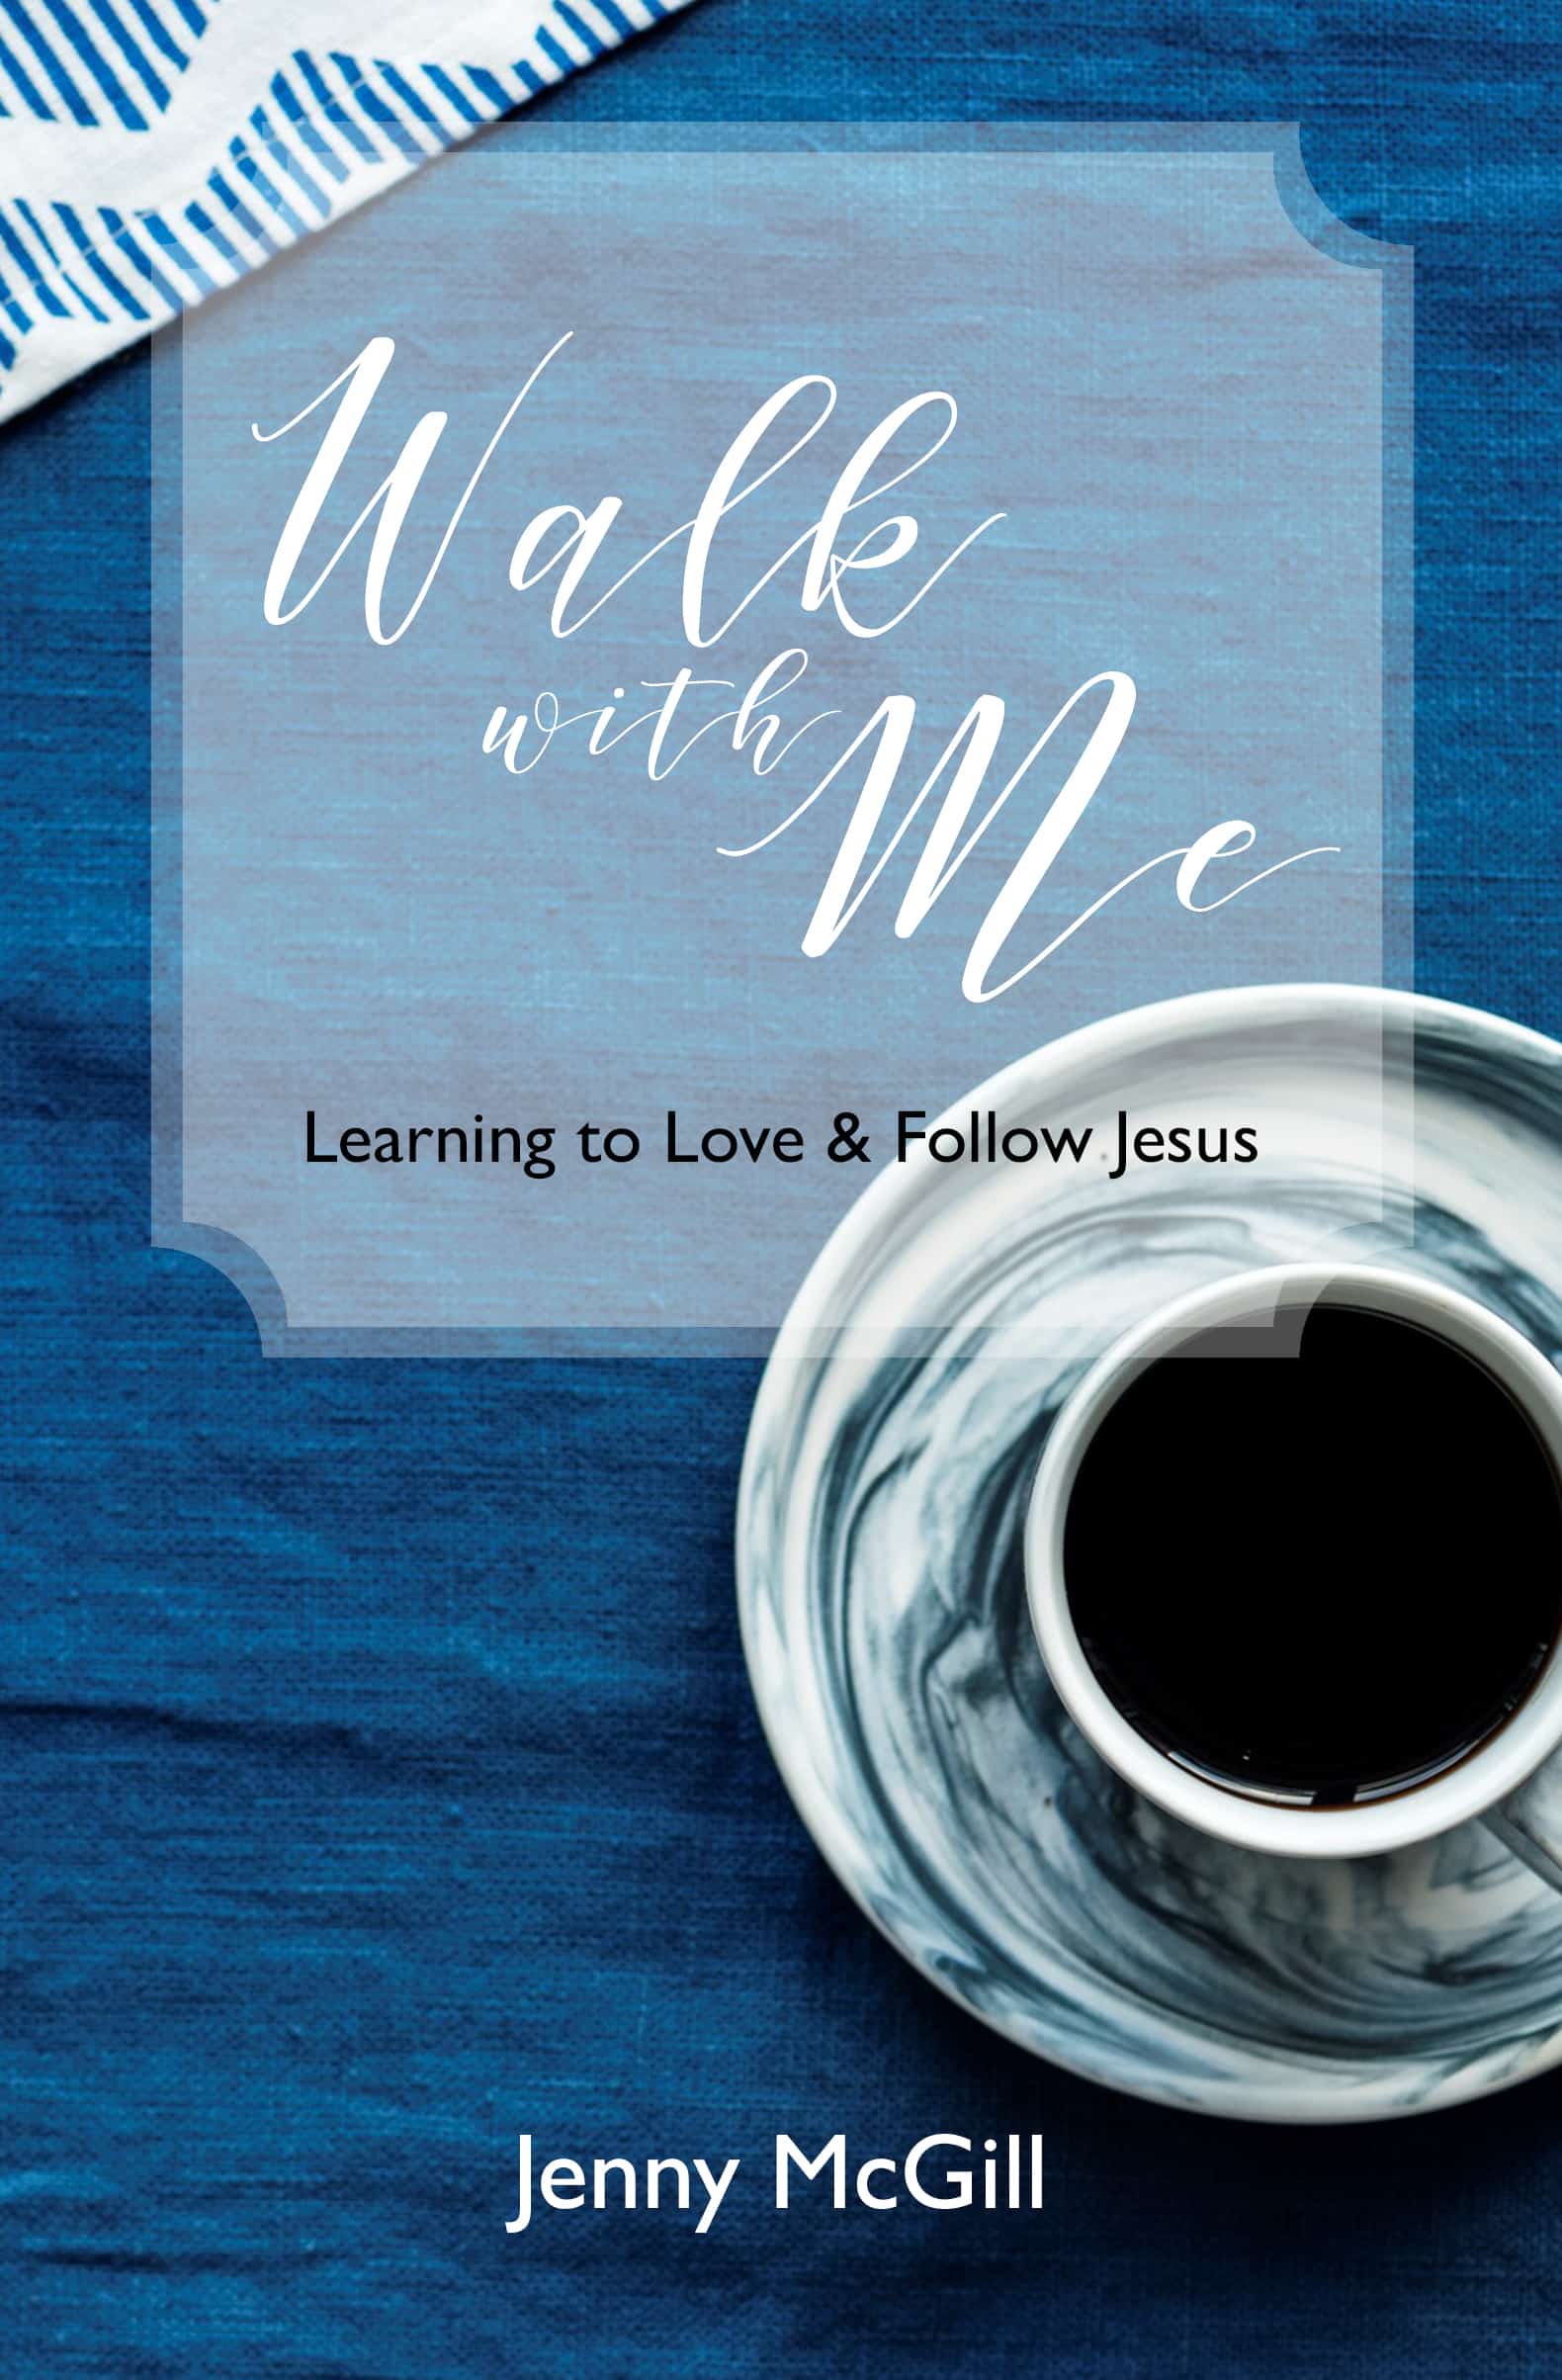 Walk with Me: Discipleship and Mentoring